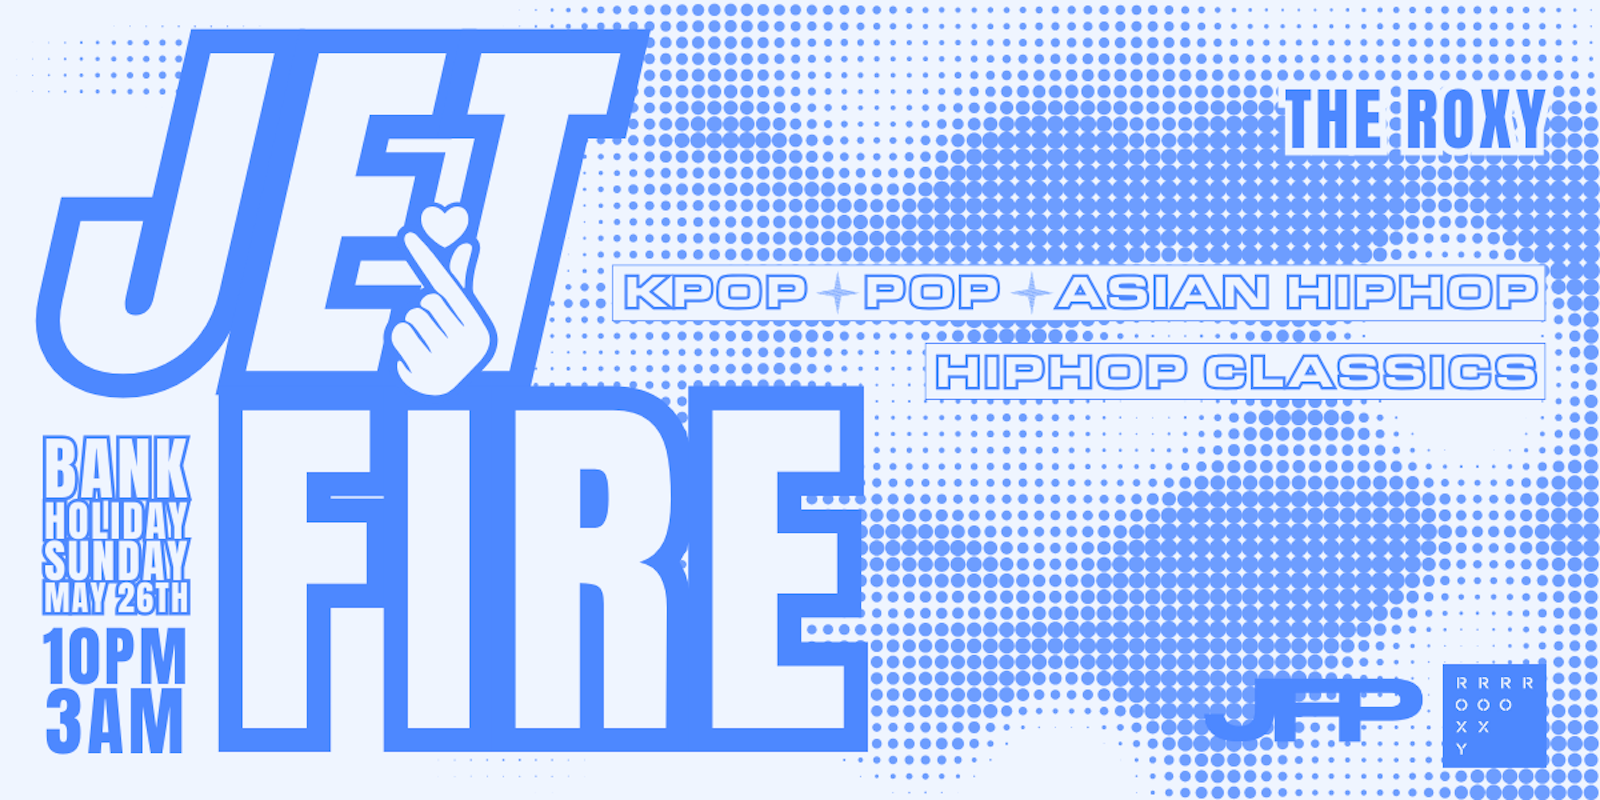 Jetfire Bank Holiday – The Return at The Roxy | Kpop, Hiphop, Classics!